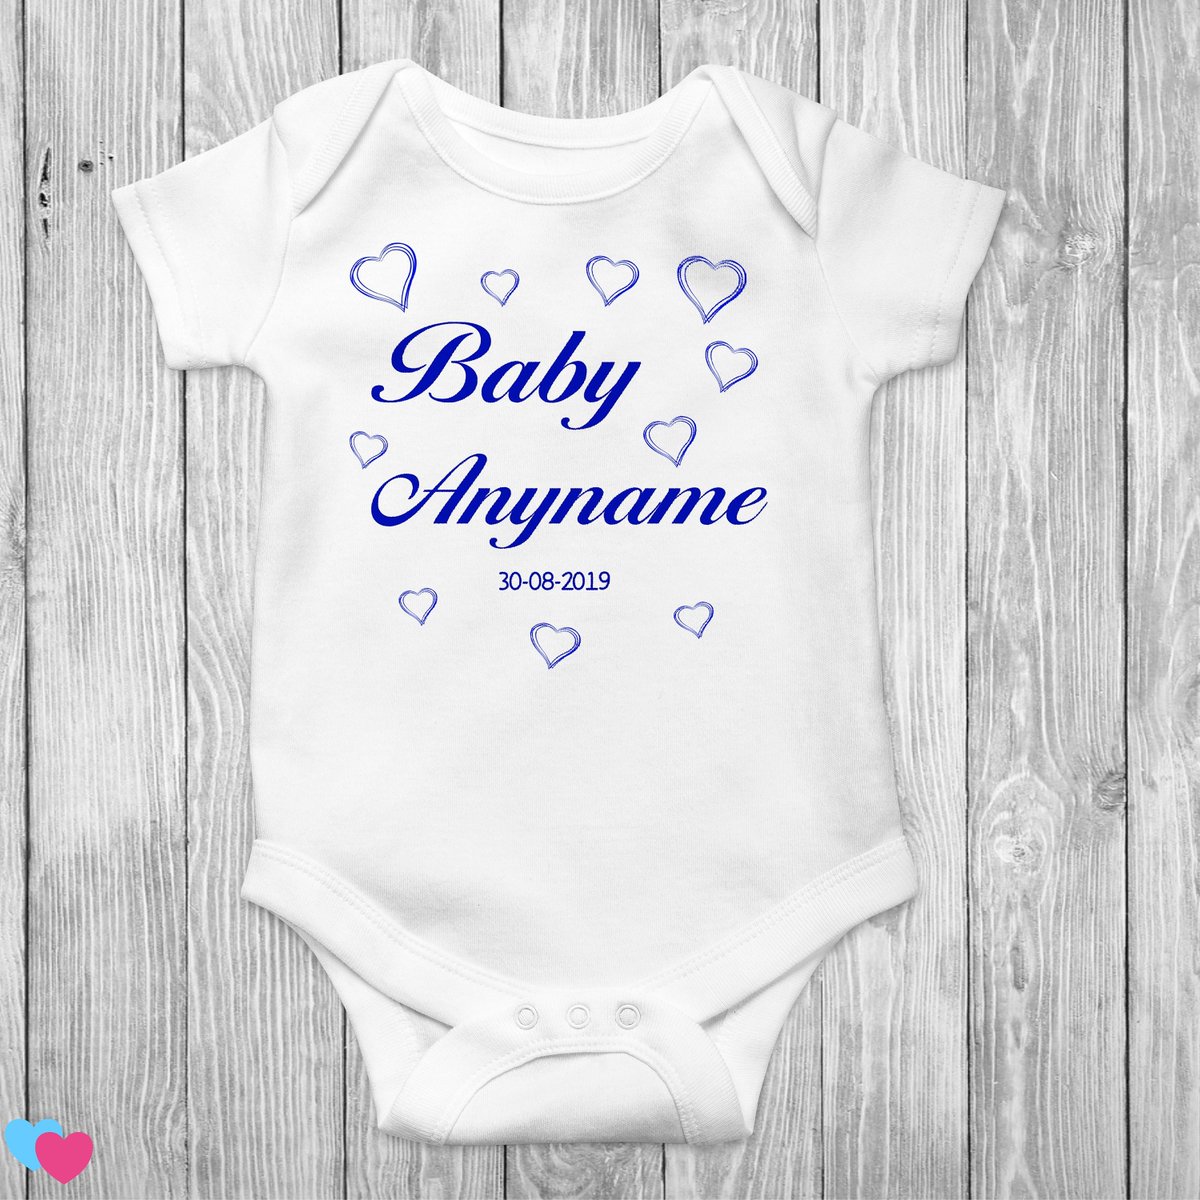 Personalised Name Babygrow - Name and Date of Birth - Various Colours - Free Delivery tuppu.net/551250cd  #BabyClothing